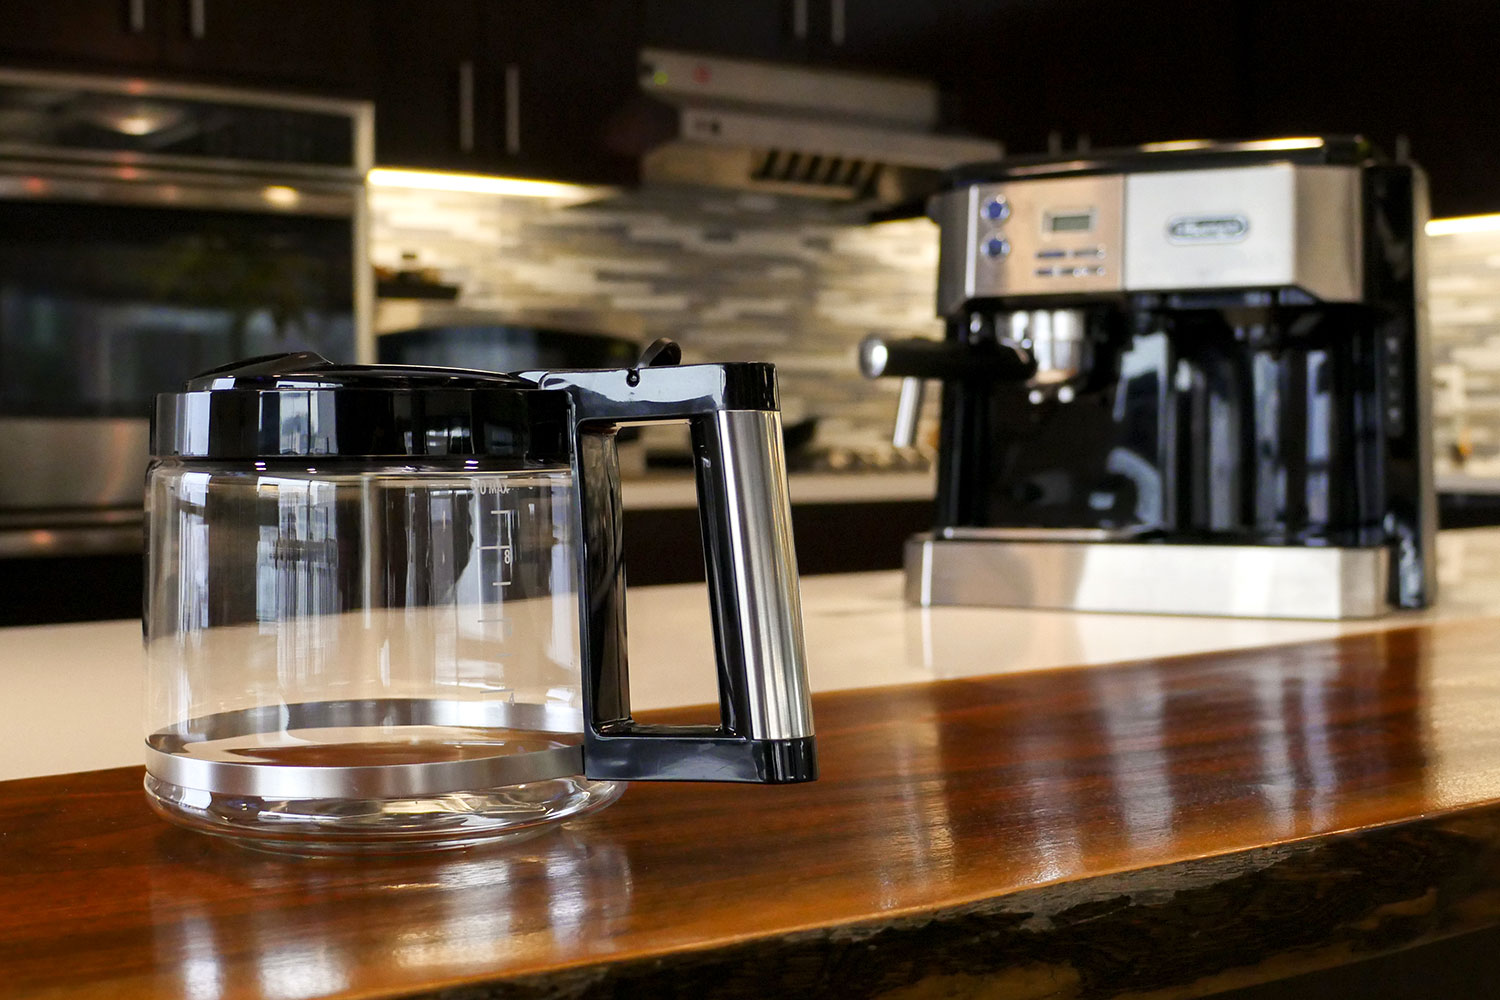 De'Longhi All-in-One Combination Coffee Maker Review